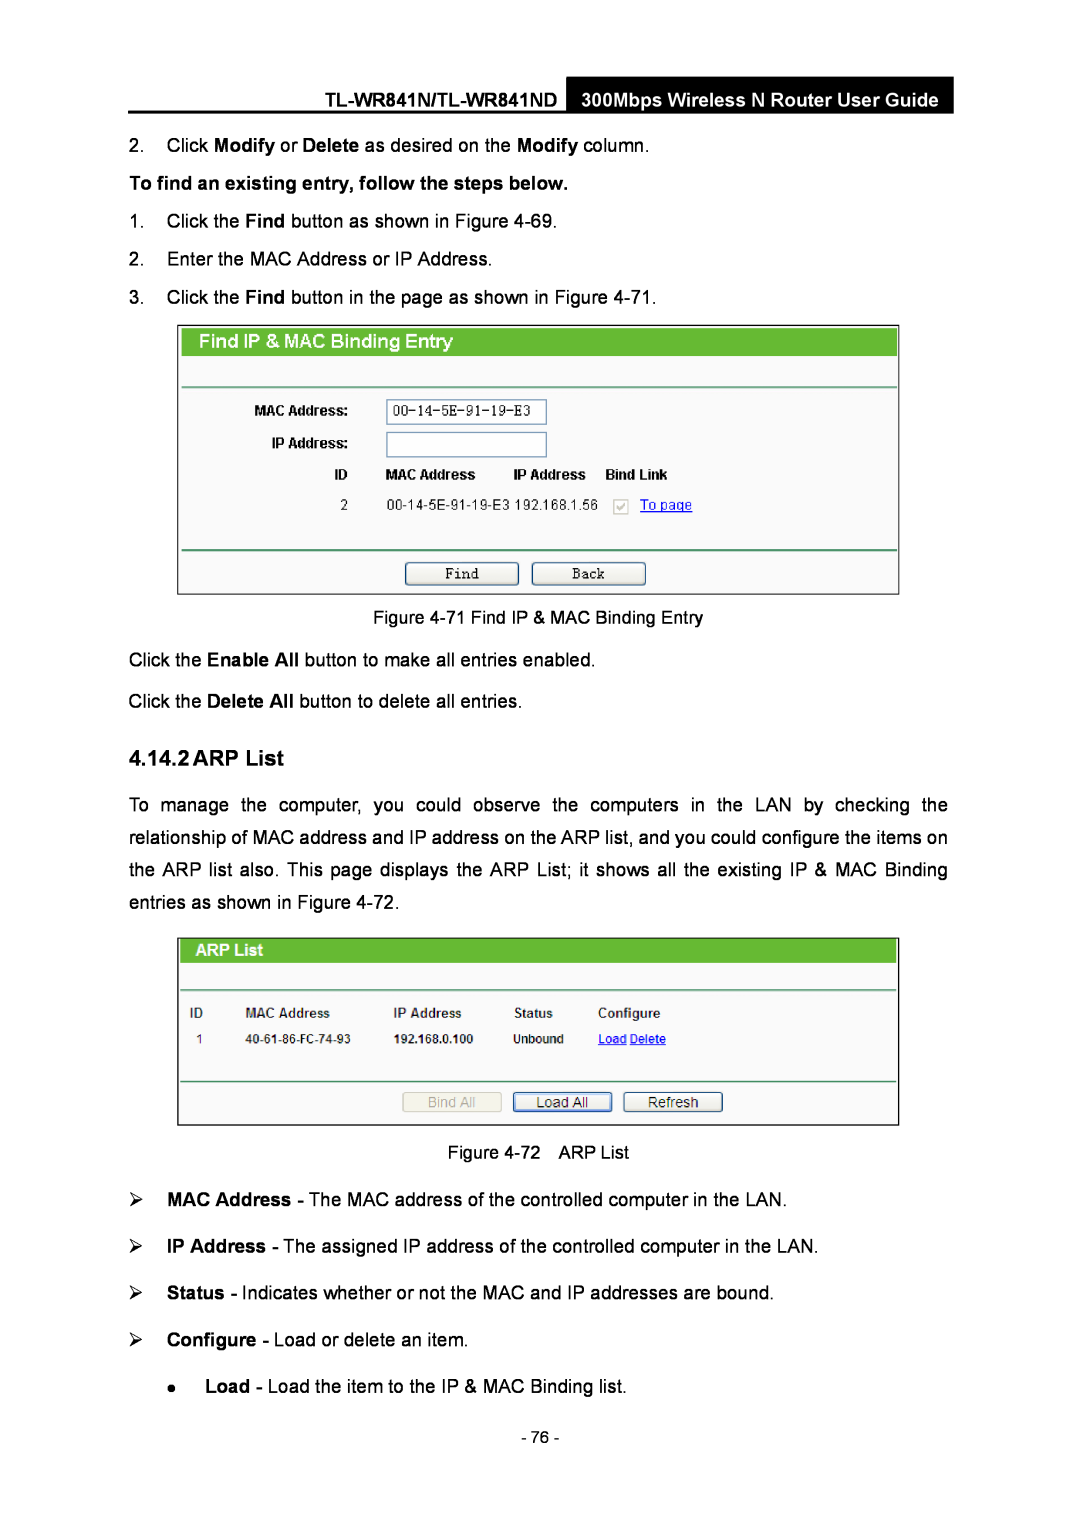 TP-Link TL-WR841N manual ARP List, To find an existing entry, follow the steps below 